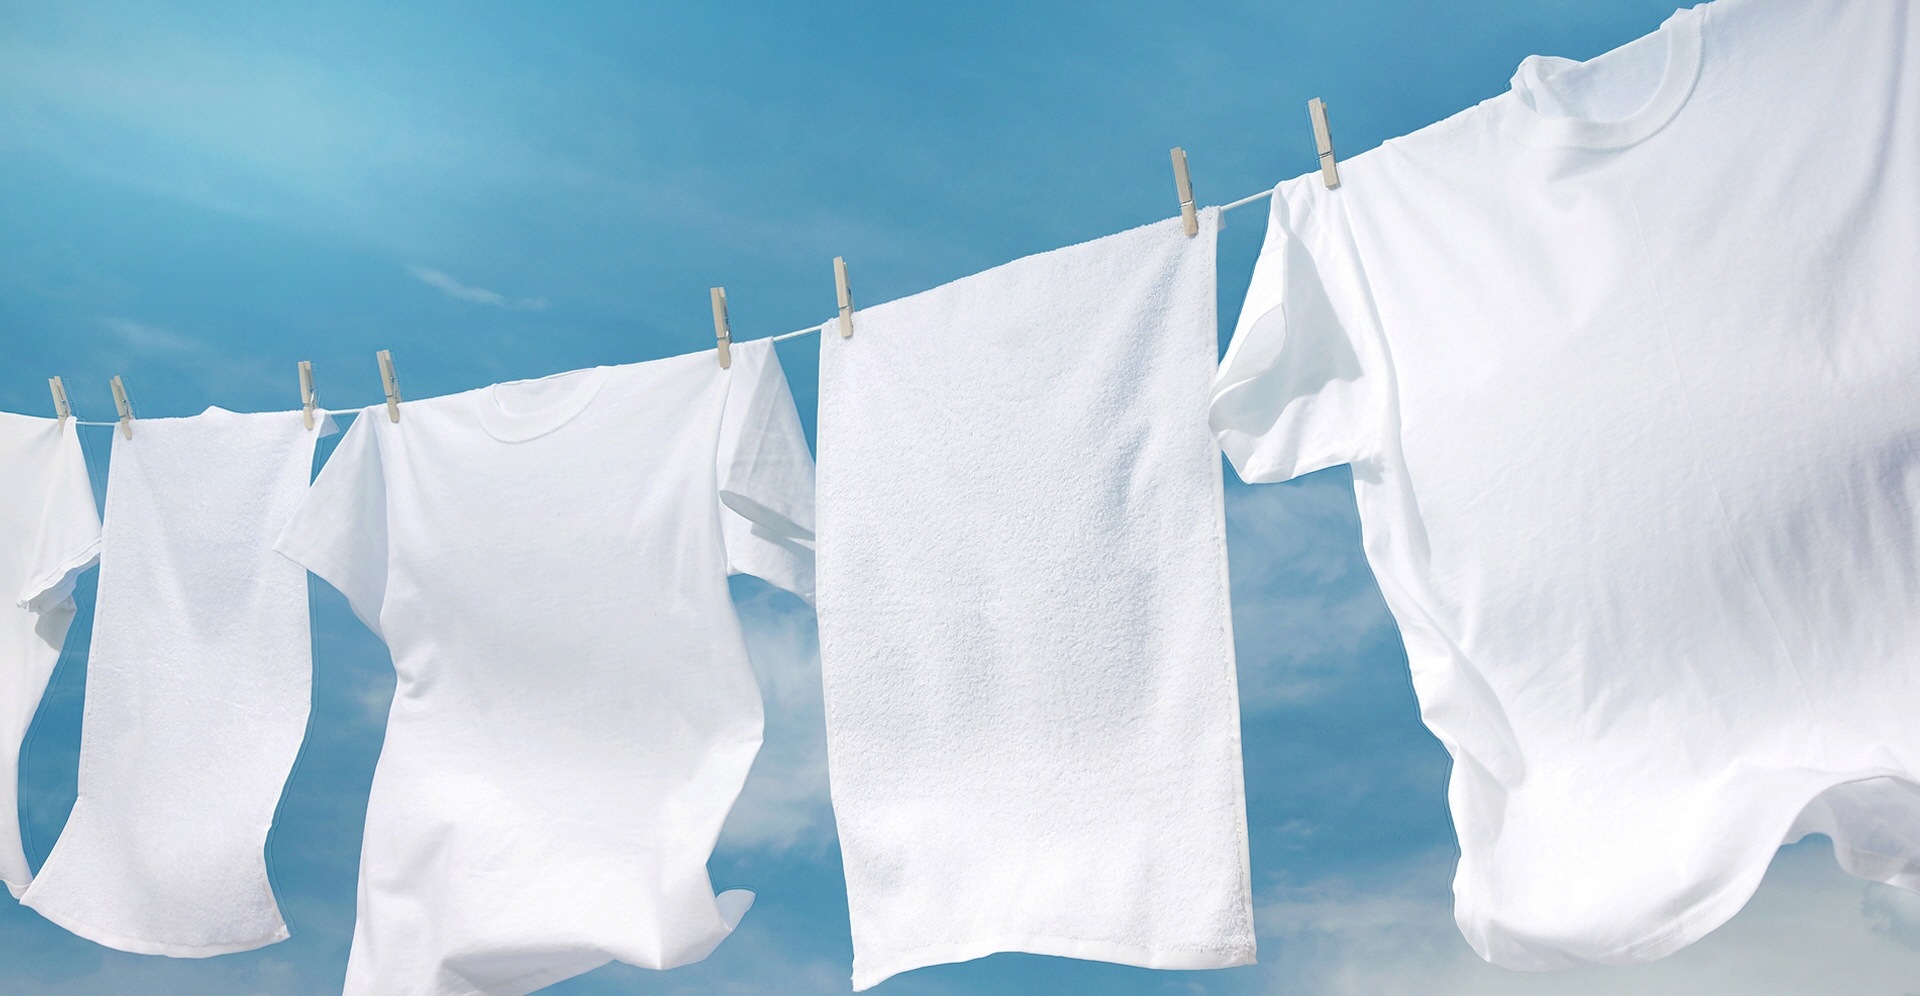 Lint-free white towels and t-shirts are hanging out to dry on a clothes line outside.